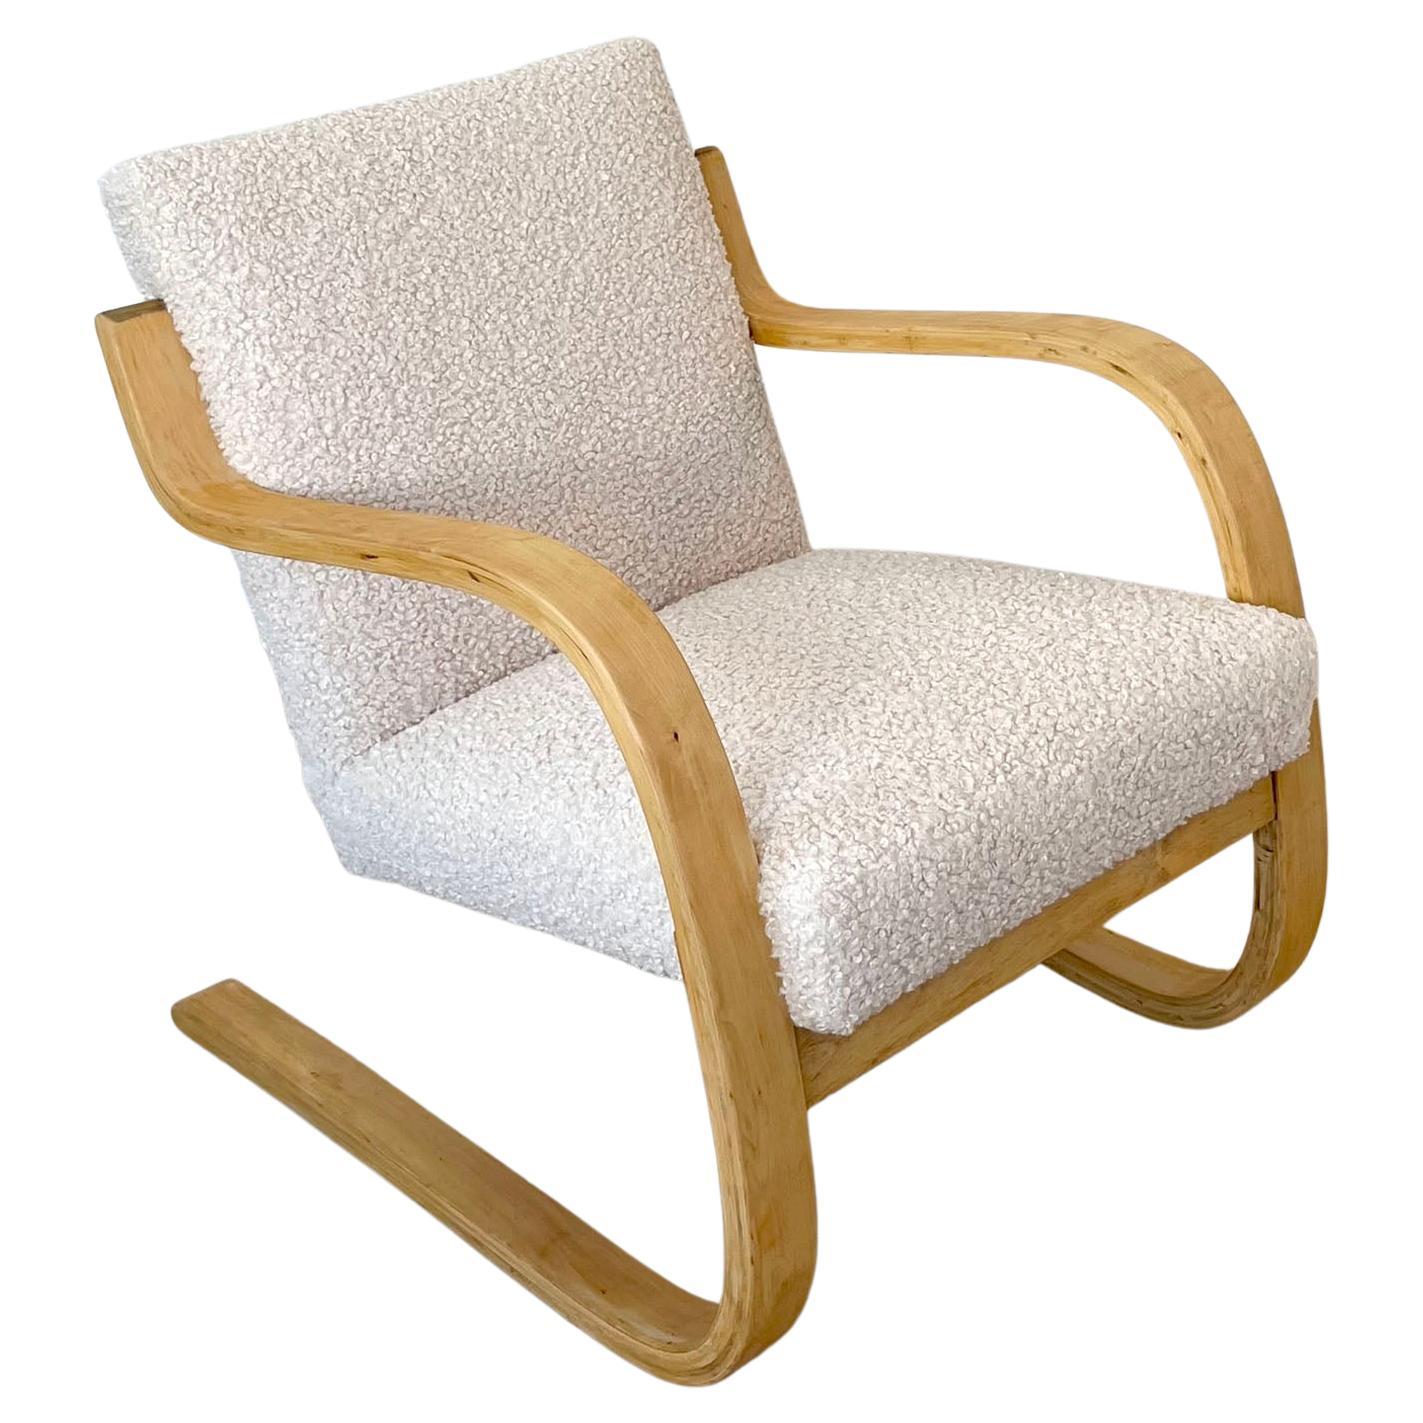 1960s, Alvar Aalto Birch Bentwood Chair Upholstered in Fluffy Boucle Shearling